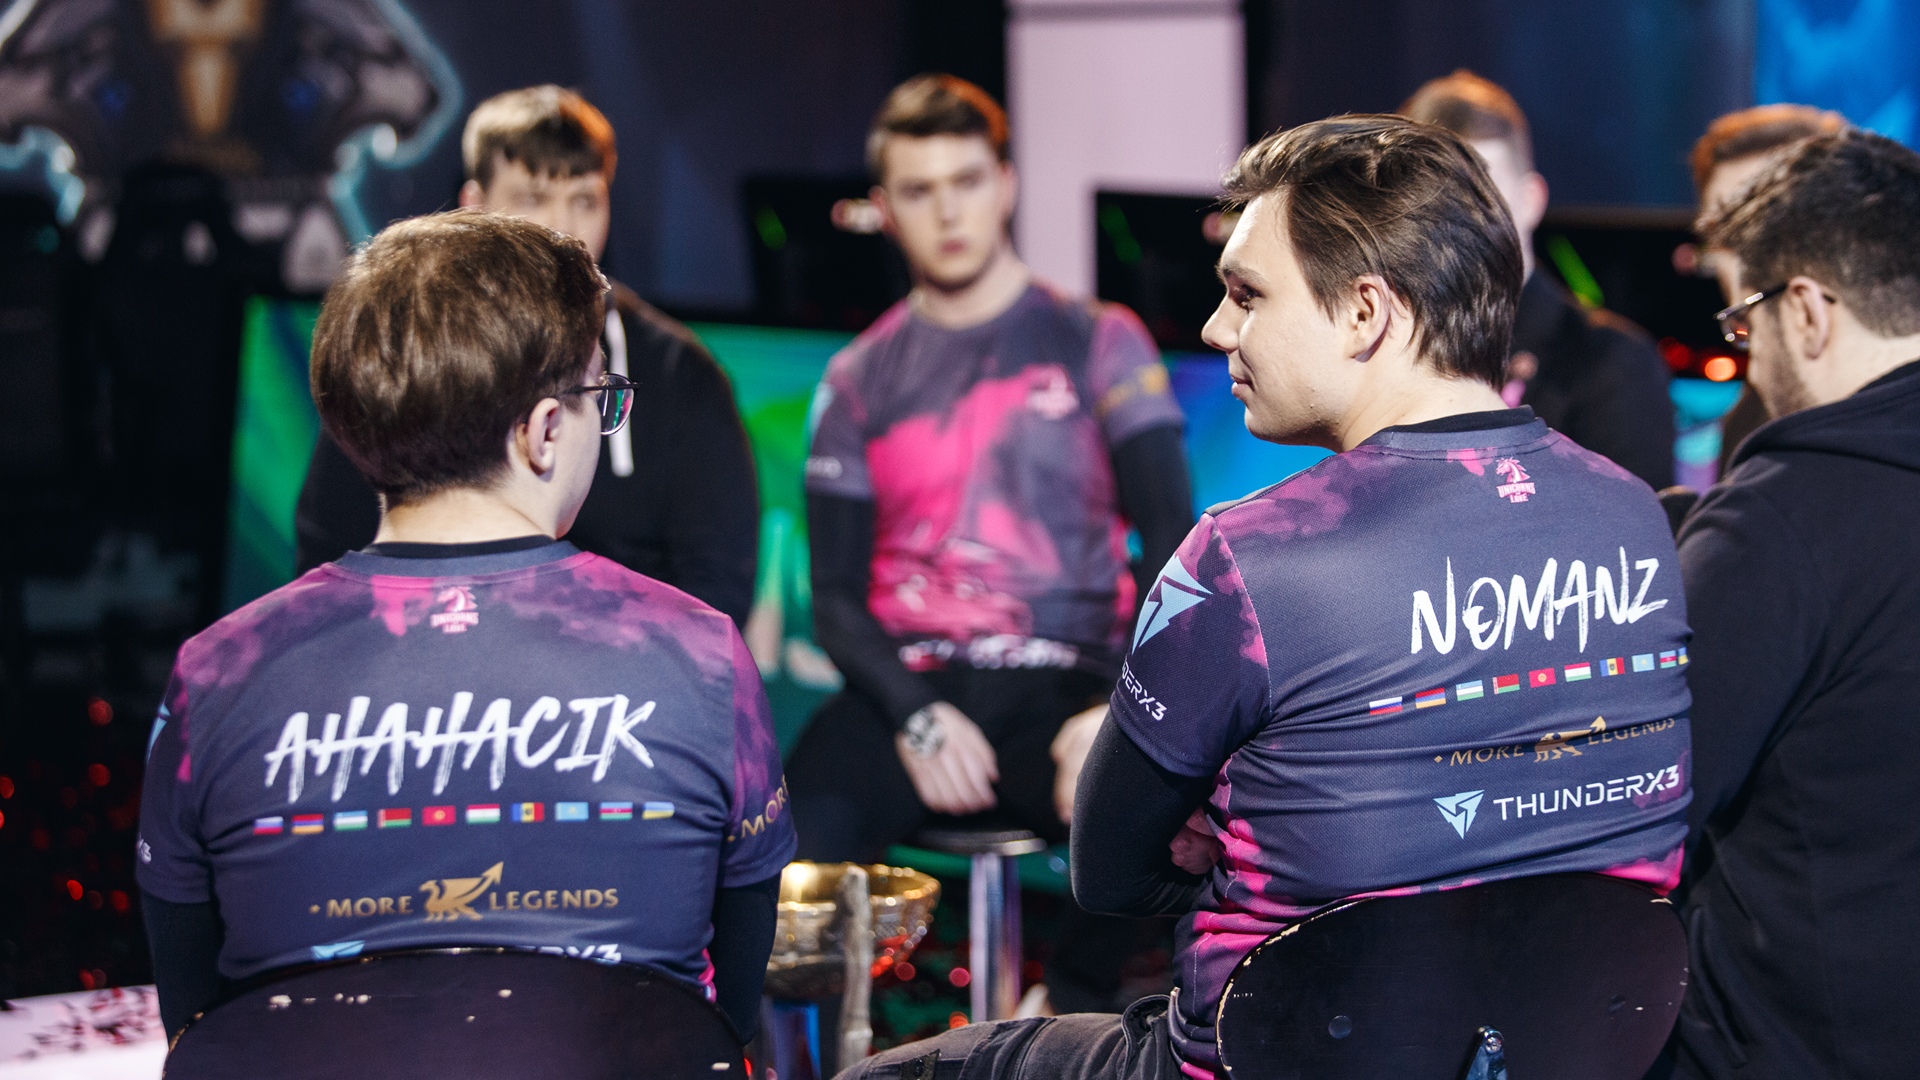 Unicorns Of Love The Unofficial Fifth Eu Team At Worlds 2020 Dot Esports Unicorns of love (russia) lol esports team upcoming matches and live streams. unofficial fifth eu team at worlds 2020